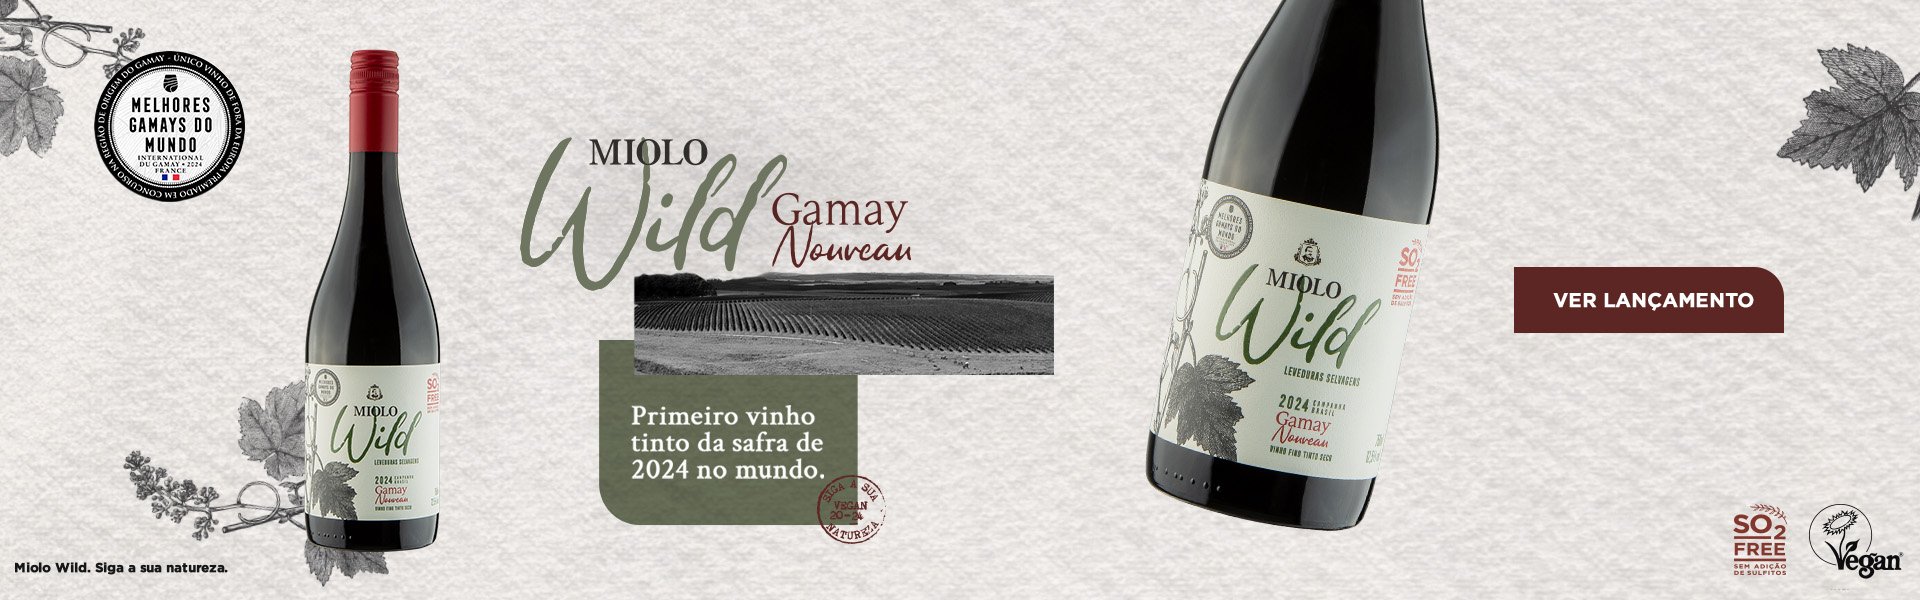 202403-ecom-miolo-home-gamay-d